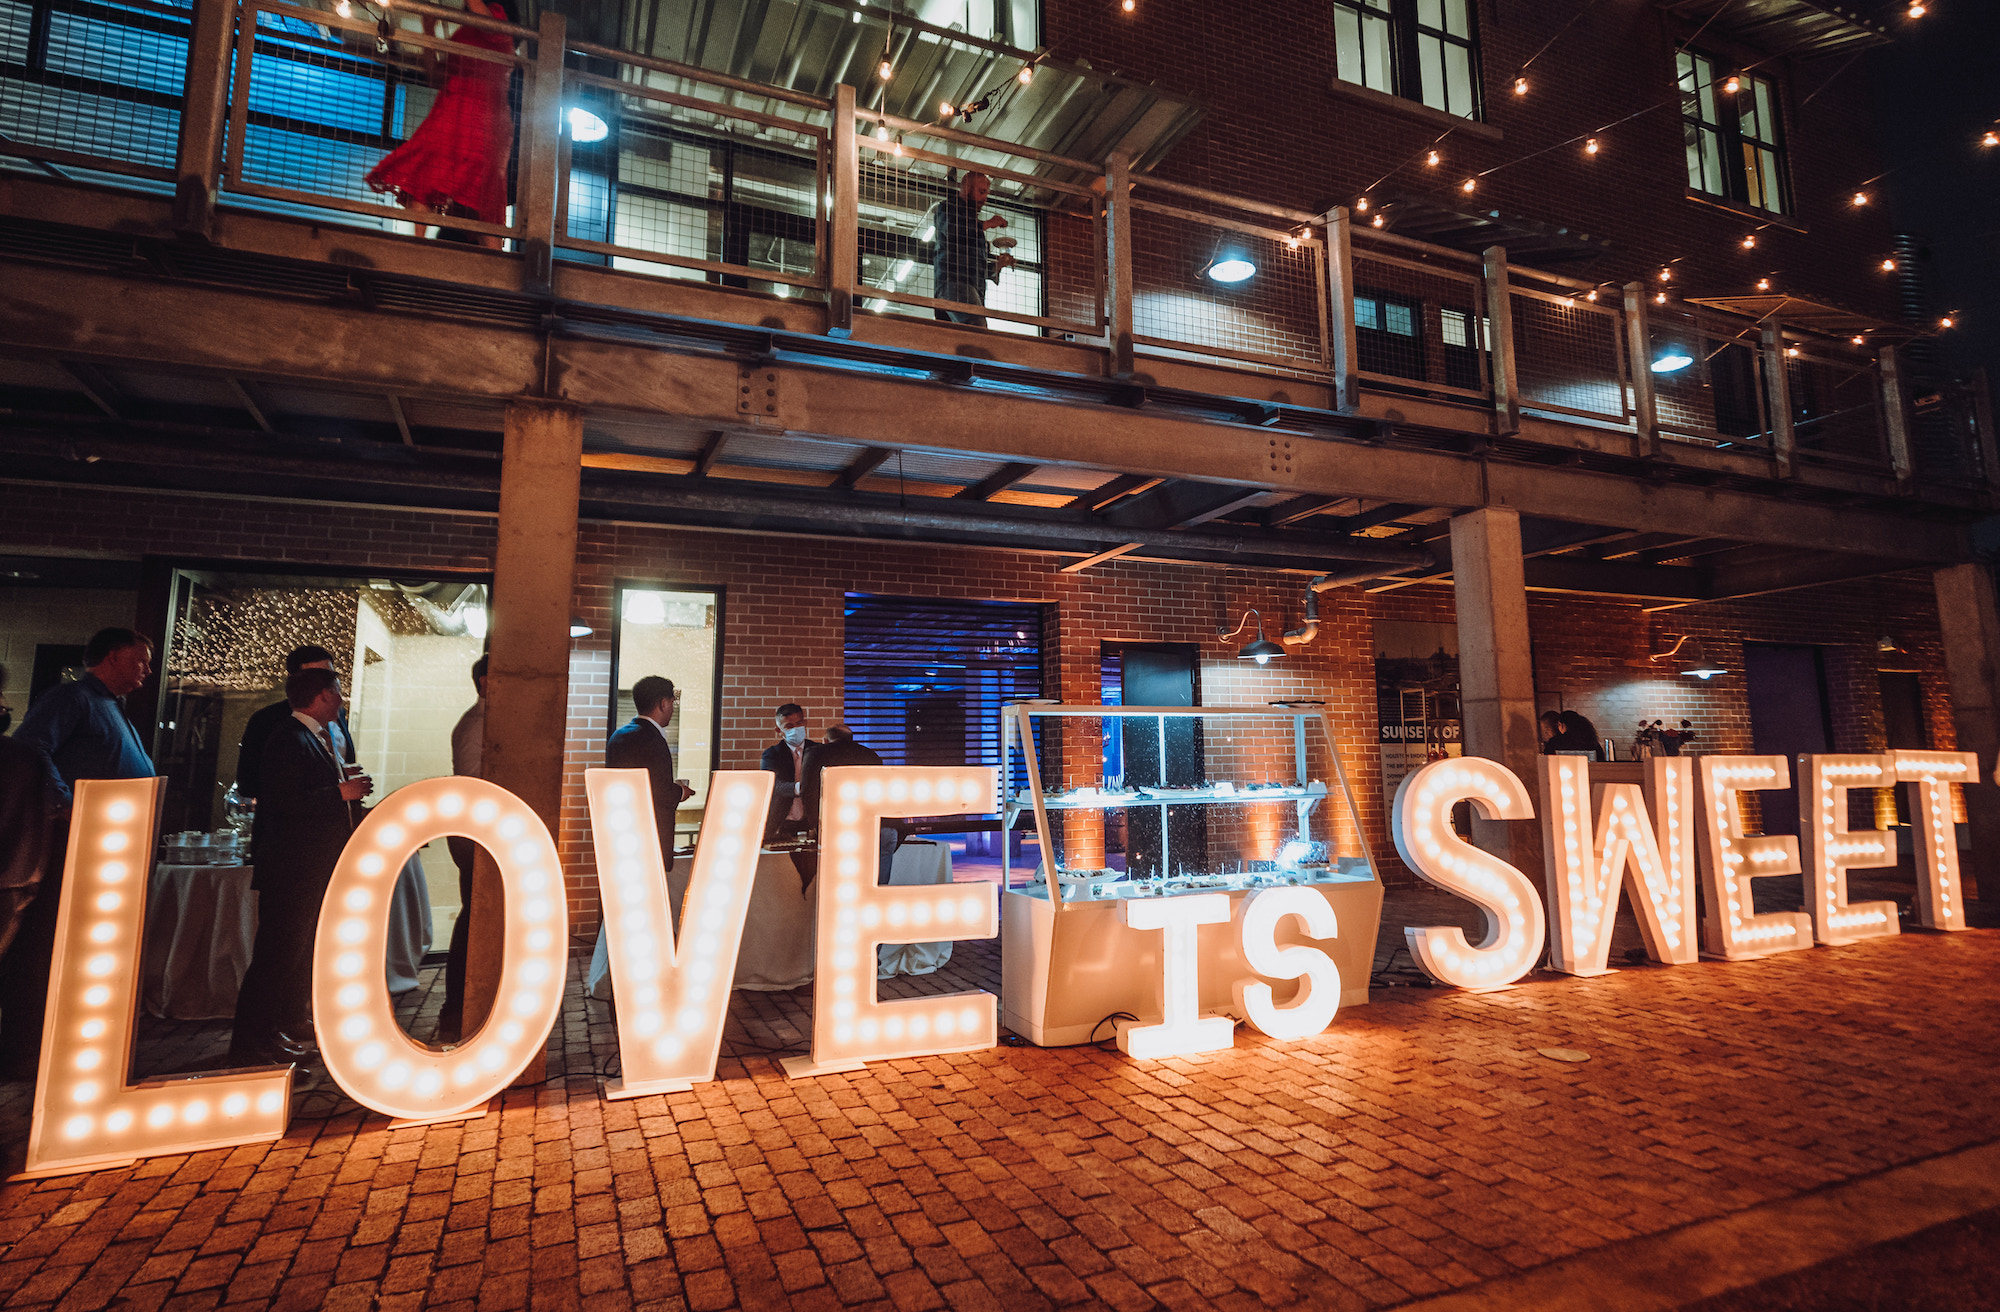 An LED sign that says "Love is Sweet" is set up outside a wedding reception in Houston.